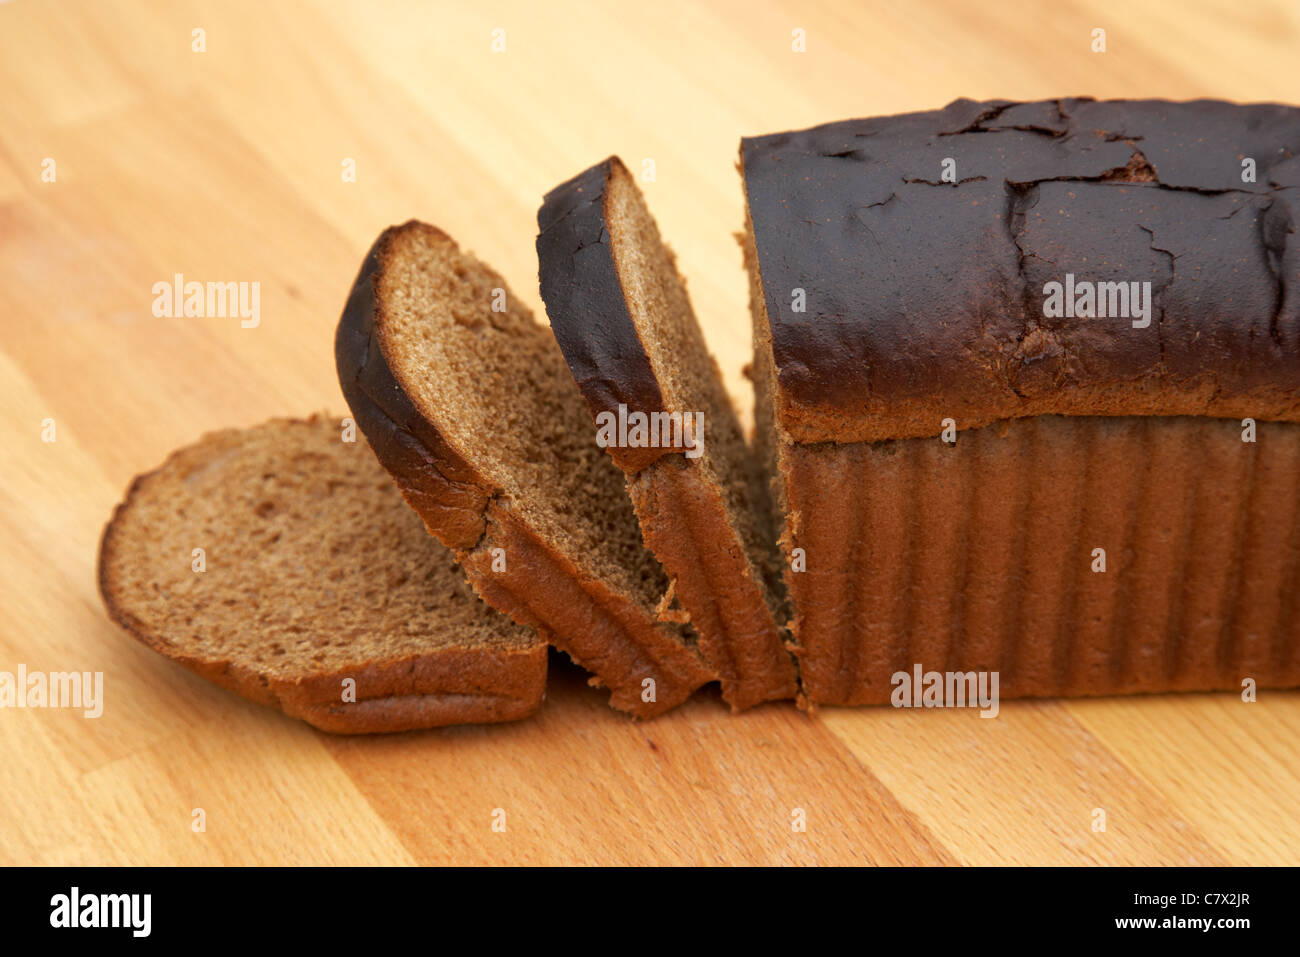 veda-bread-loaf-a-malted-bread-sold-in-northern-ireland-C7X2JR.jpg